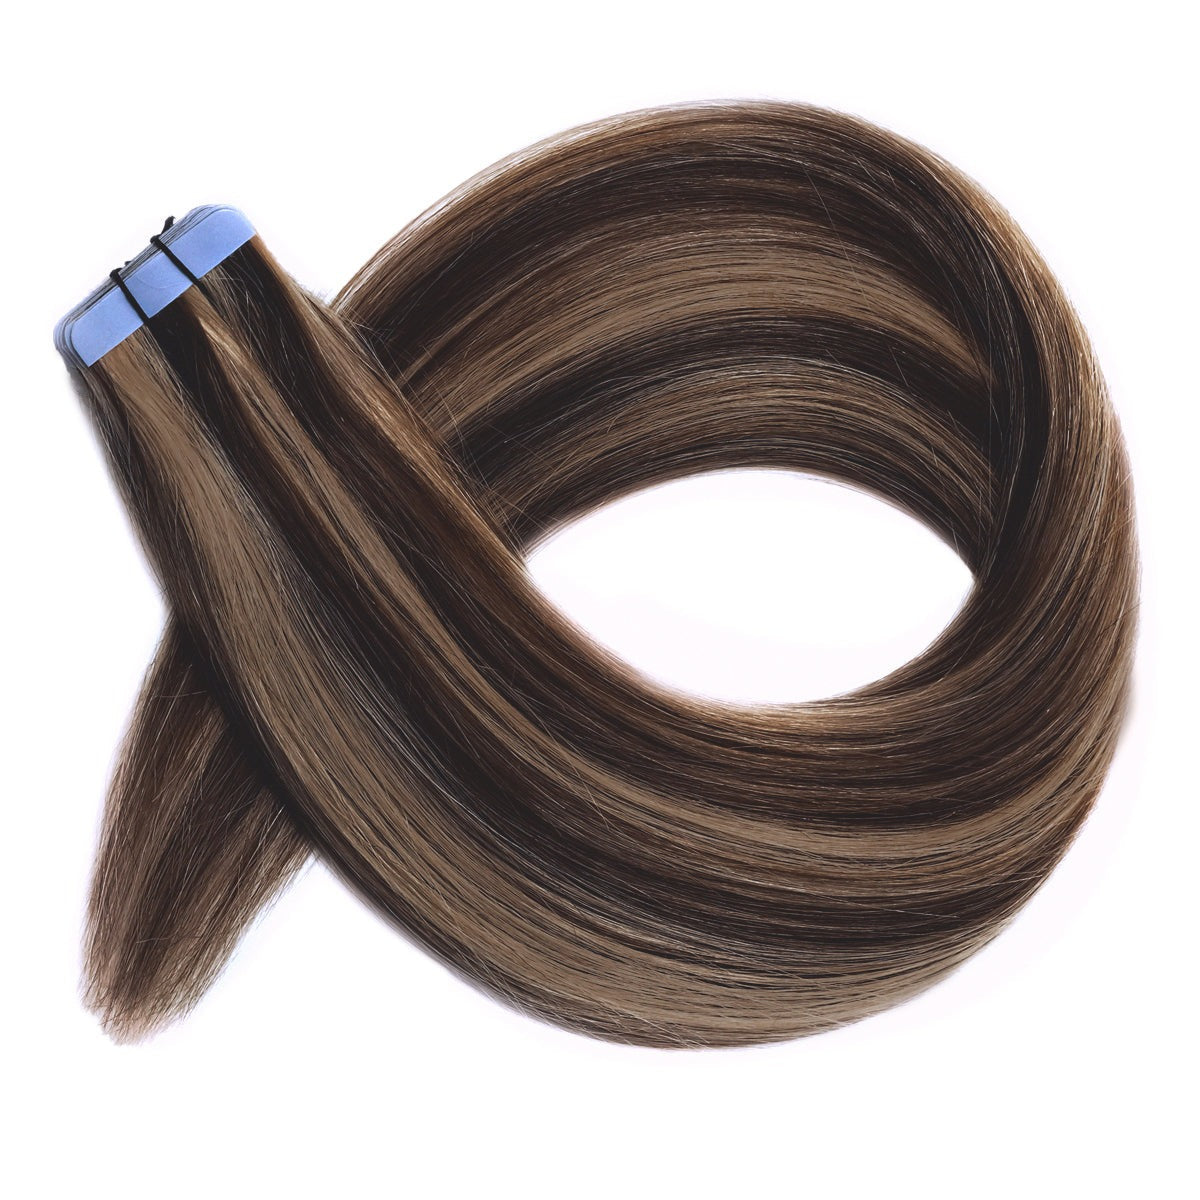 Sample Hair Extensions Colour Match #2/12 Dark Brown & Dirty Blonde Mix